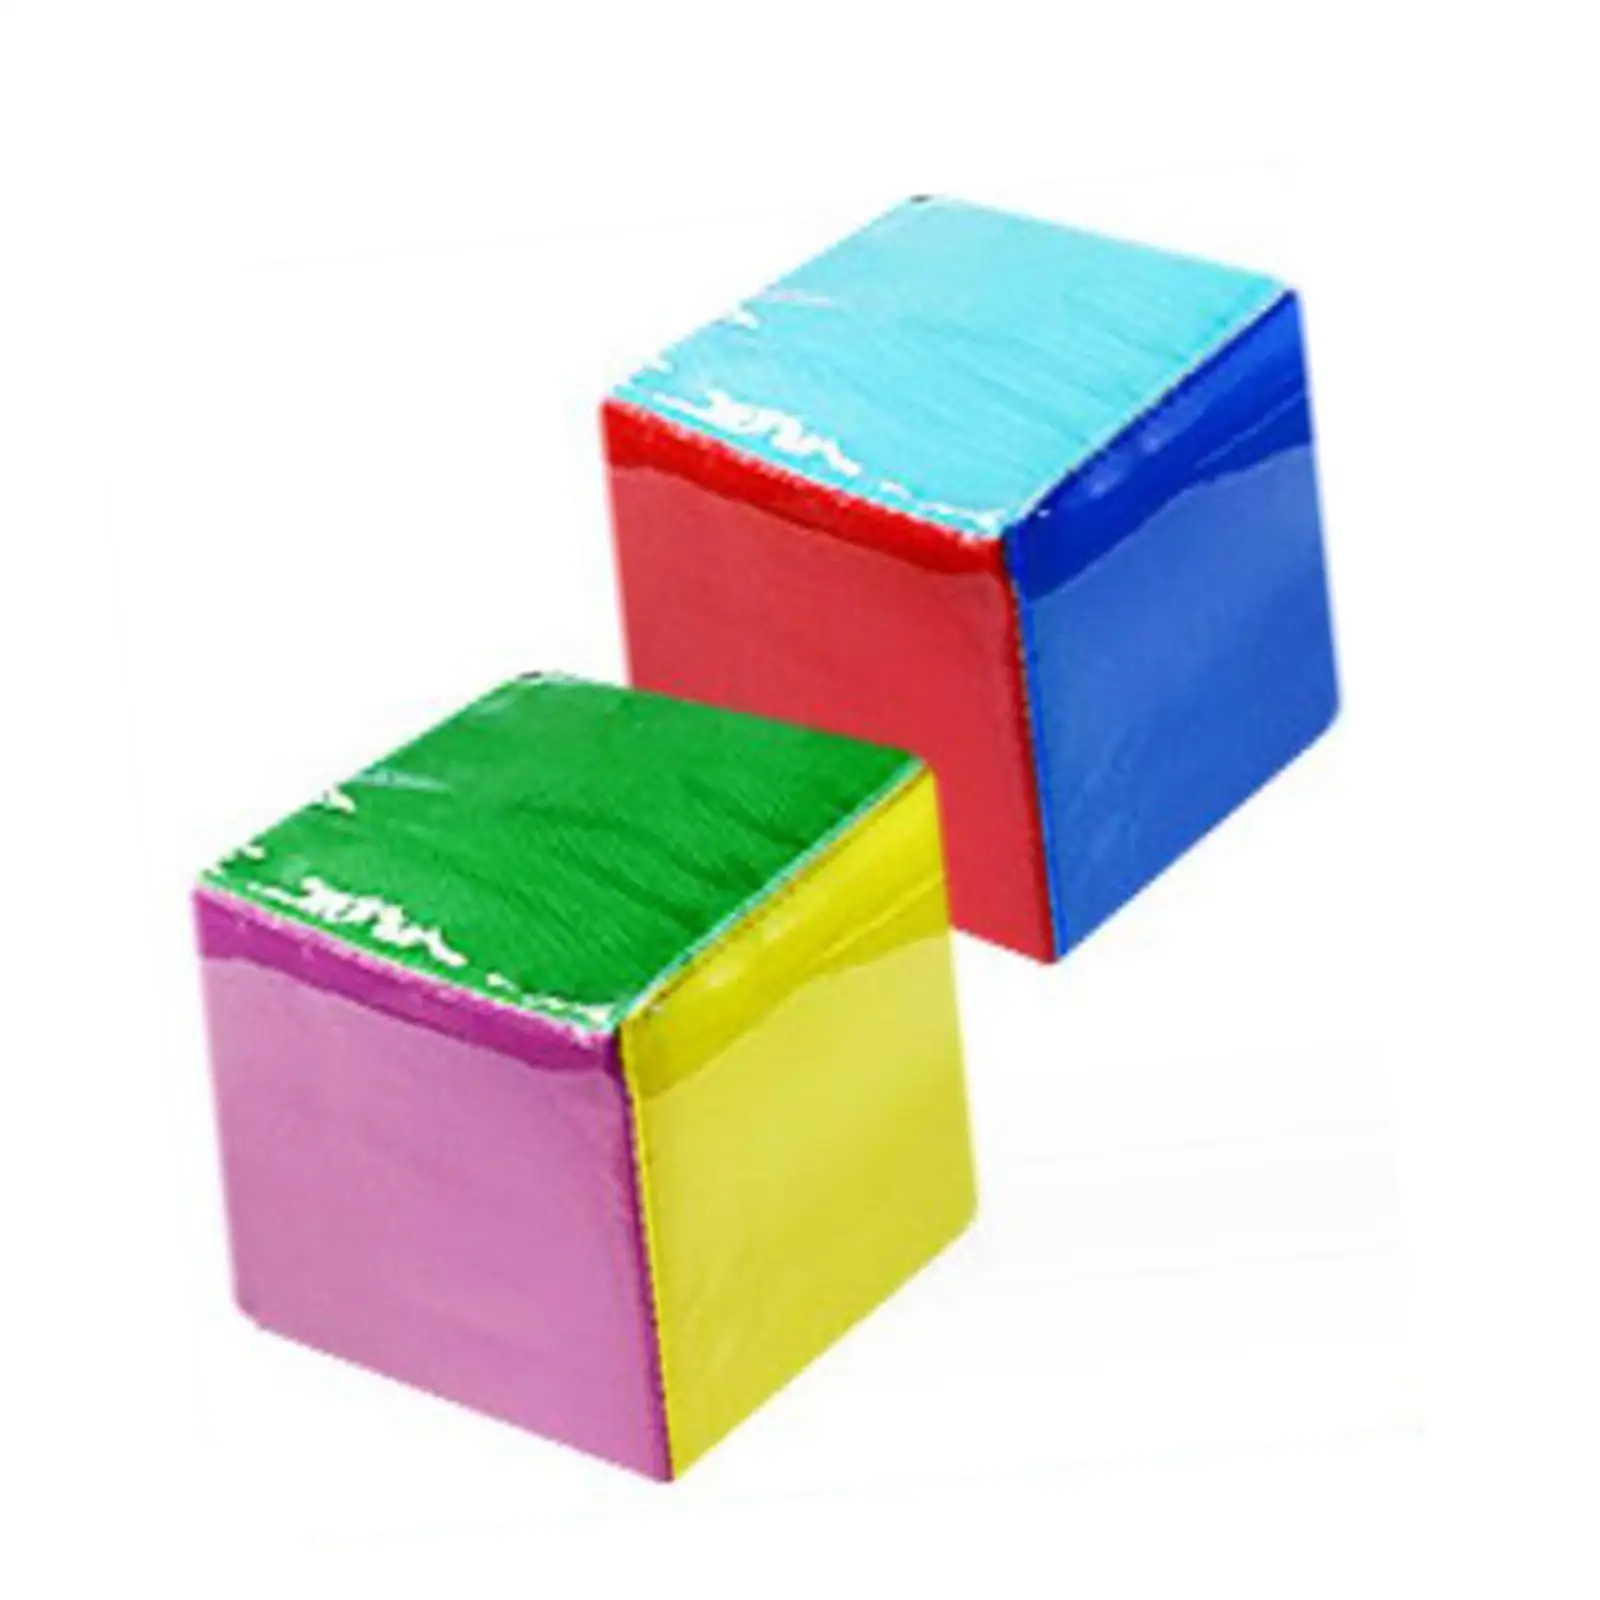 Education Playing Game Dice Props Soft Pocket Cubes for Kindergarten Preschool Activity Whole Class Individual Play Small Group